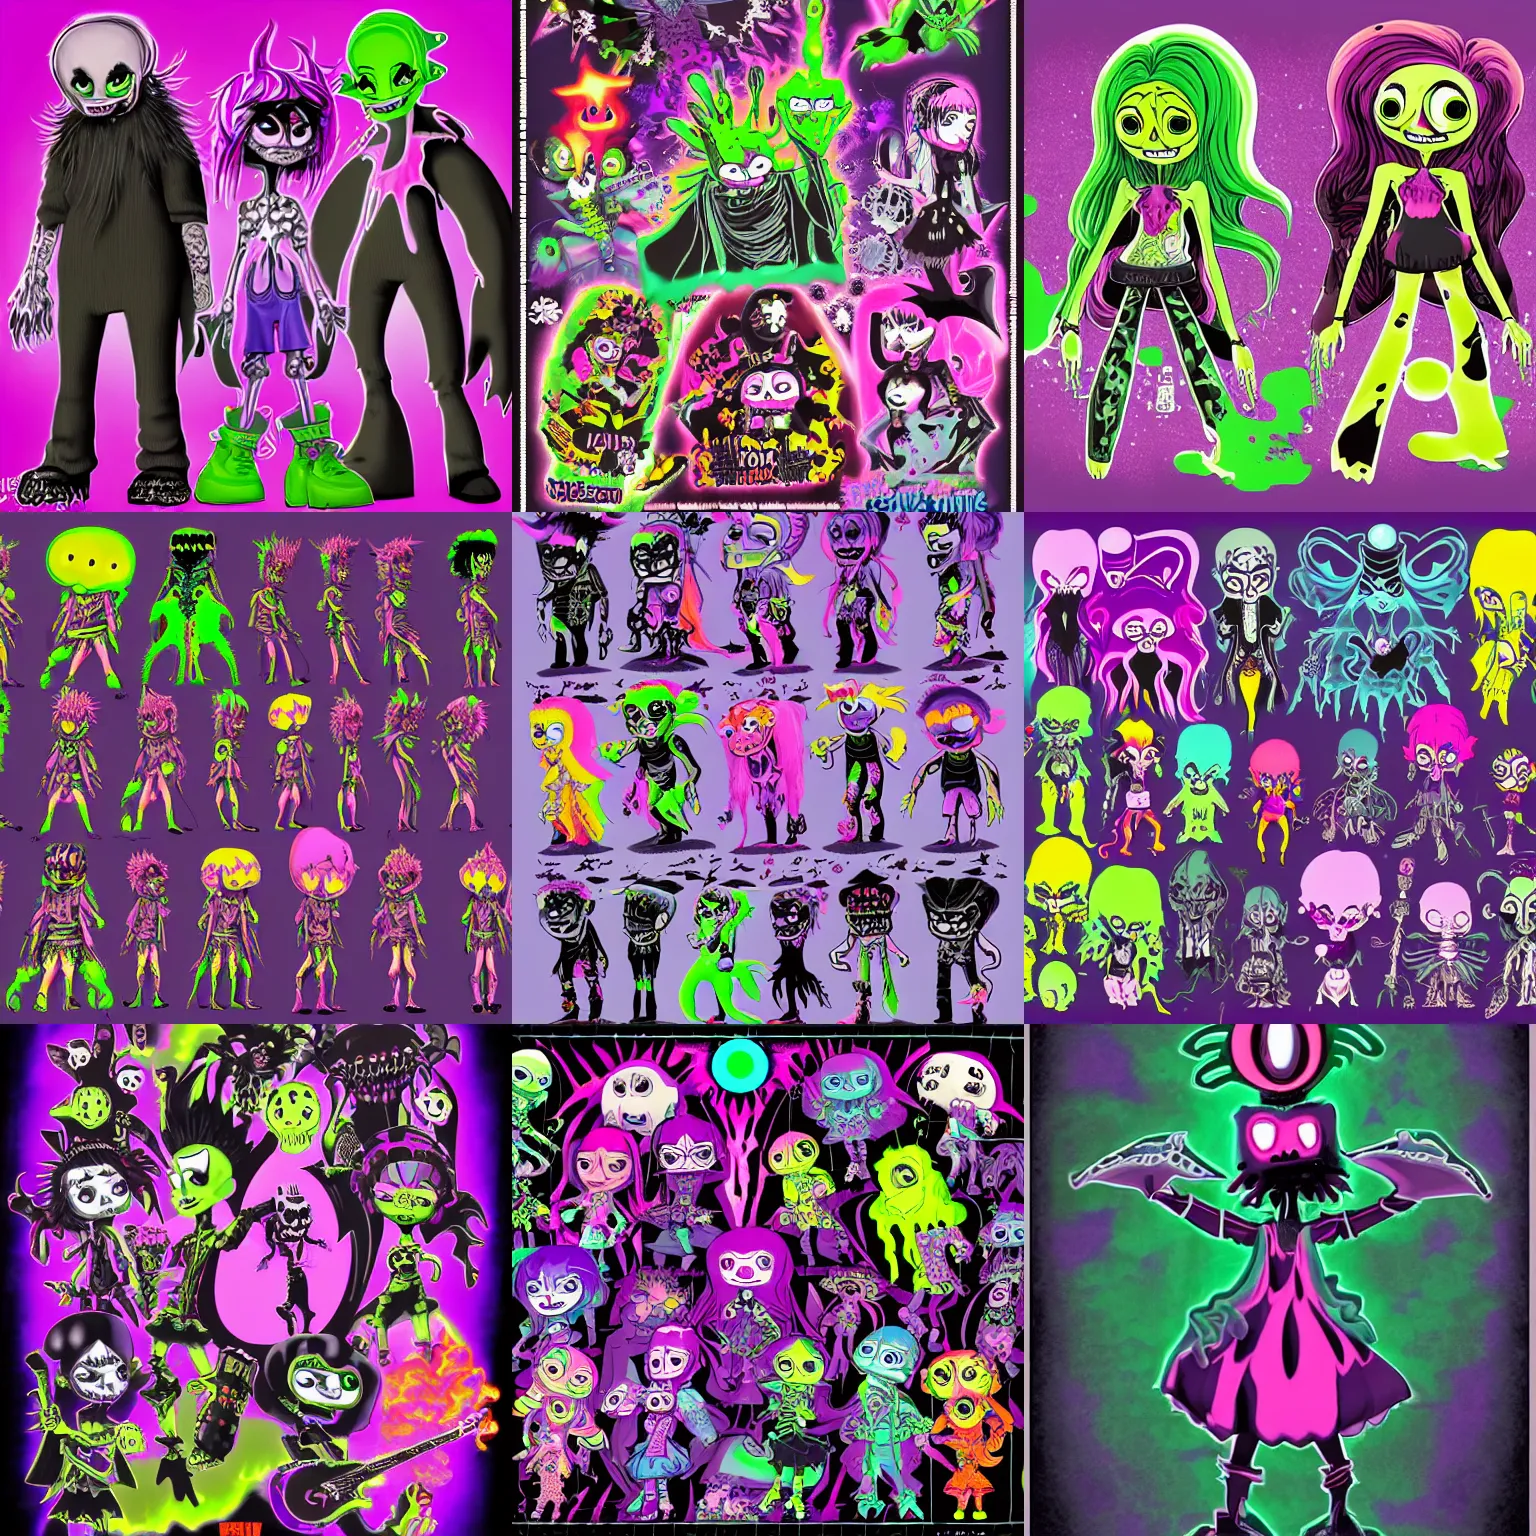 Prompt: CGI lisa frank gothic punk toxic glow in the dark bones vampiric rockstar vampire squid concept character designs of various shapes and sizes by genndy tartakovsky and the creators of fret nice at pieces interactive and splatoon by nintendo and the psychonauts by doublefines tim shafer artists for the new hotel transylvania film managed by pixar and overseen by Jamie Hewlett from gorillaz